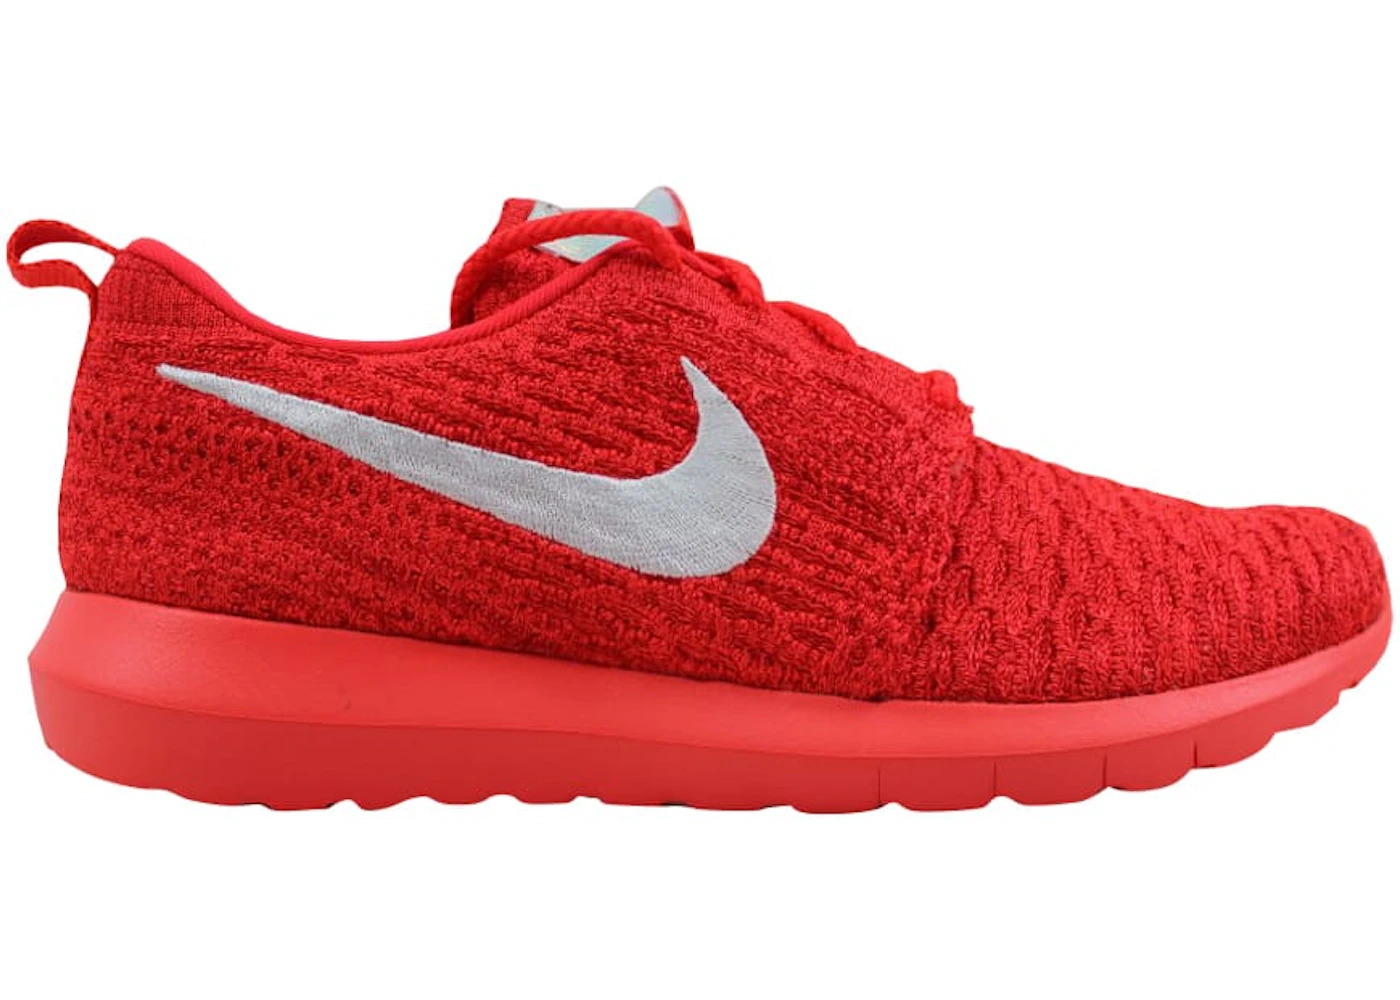 NM Flyknit Bright Red - 843386-604 - US